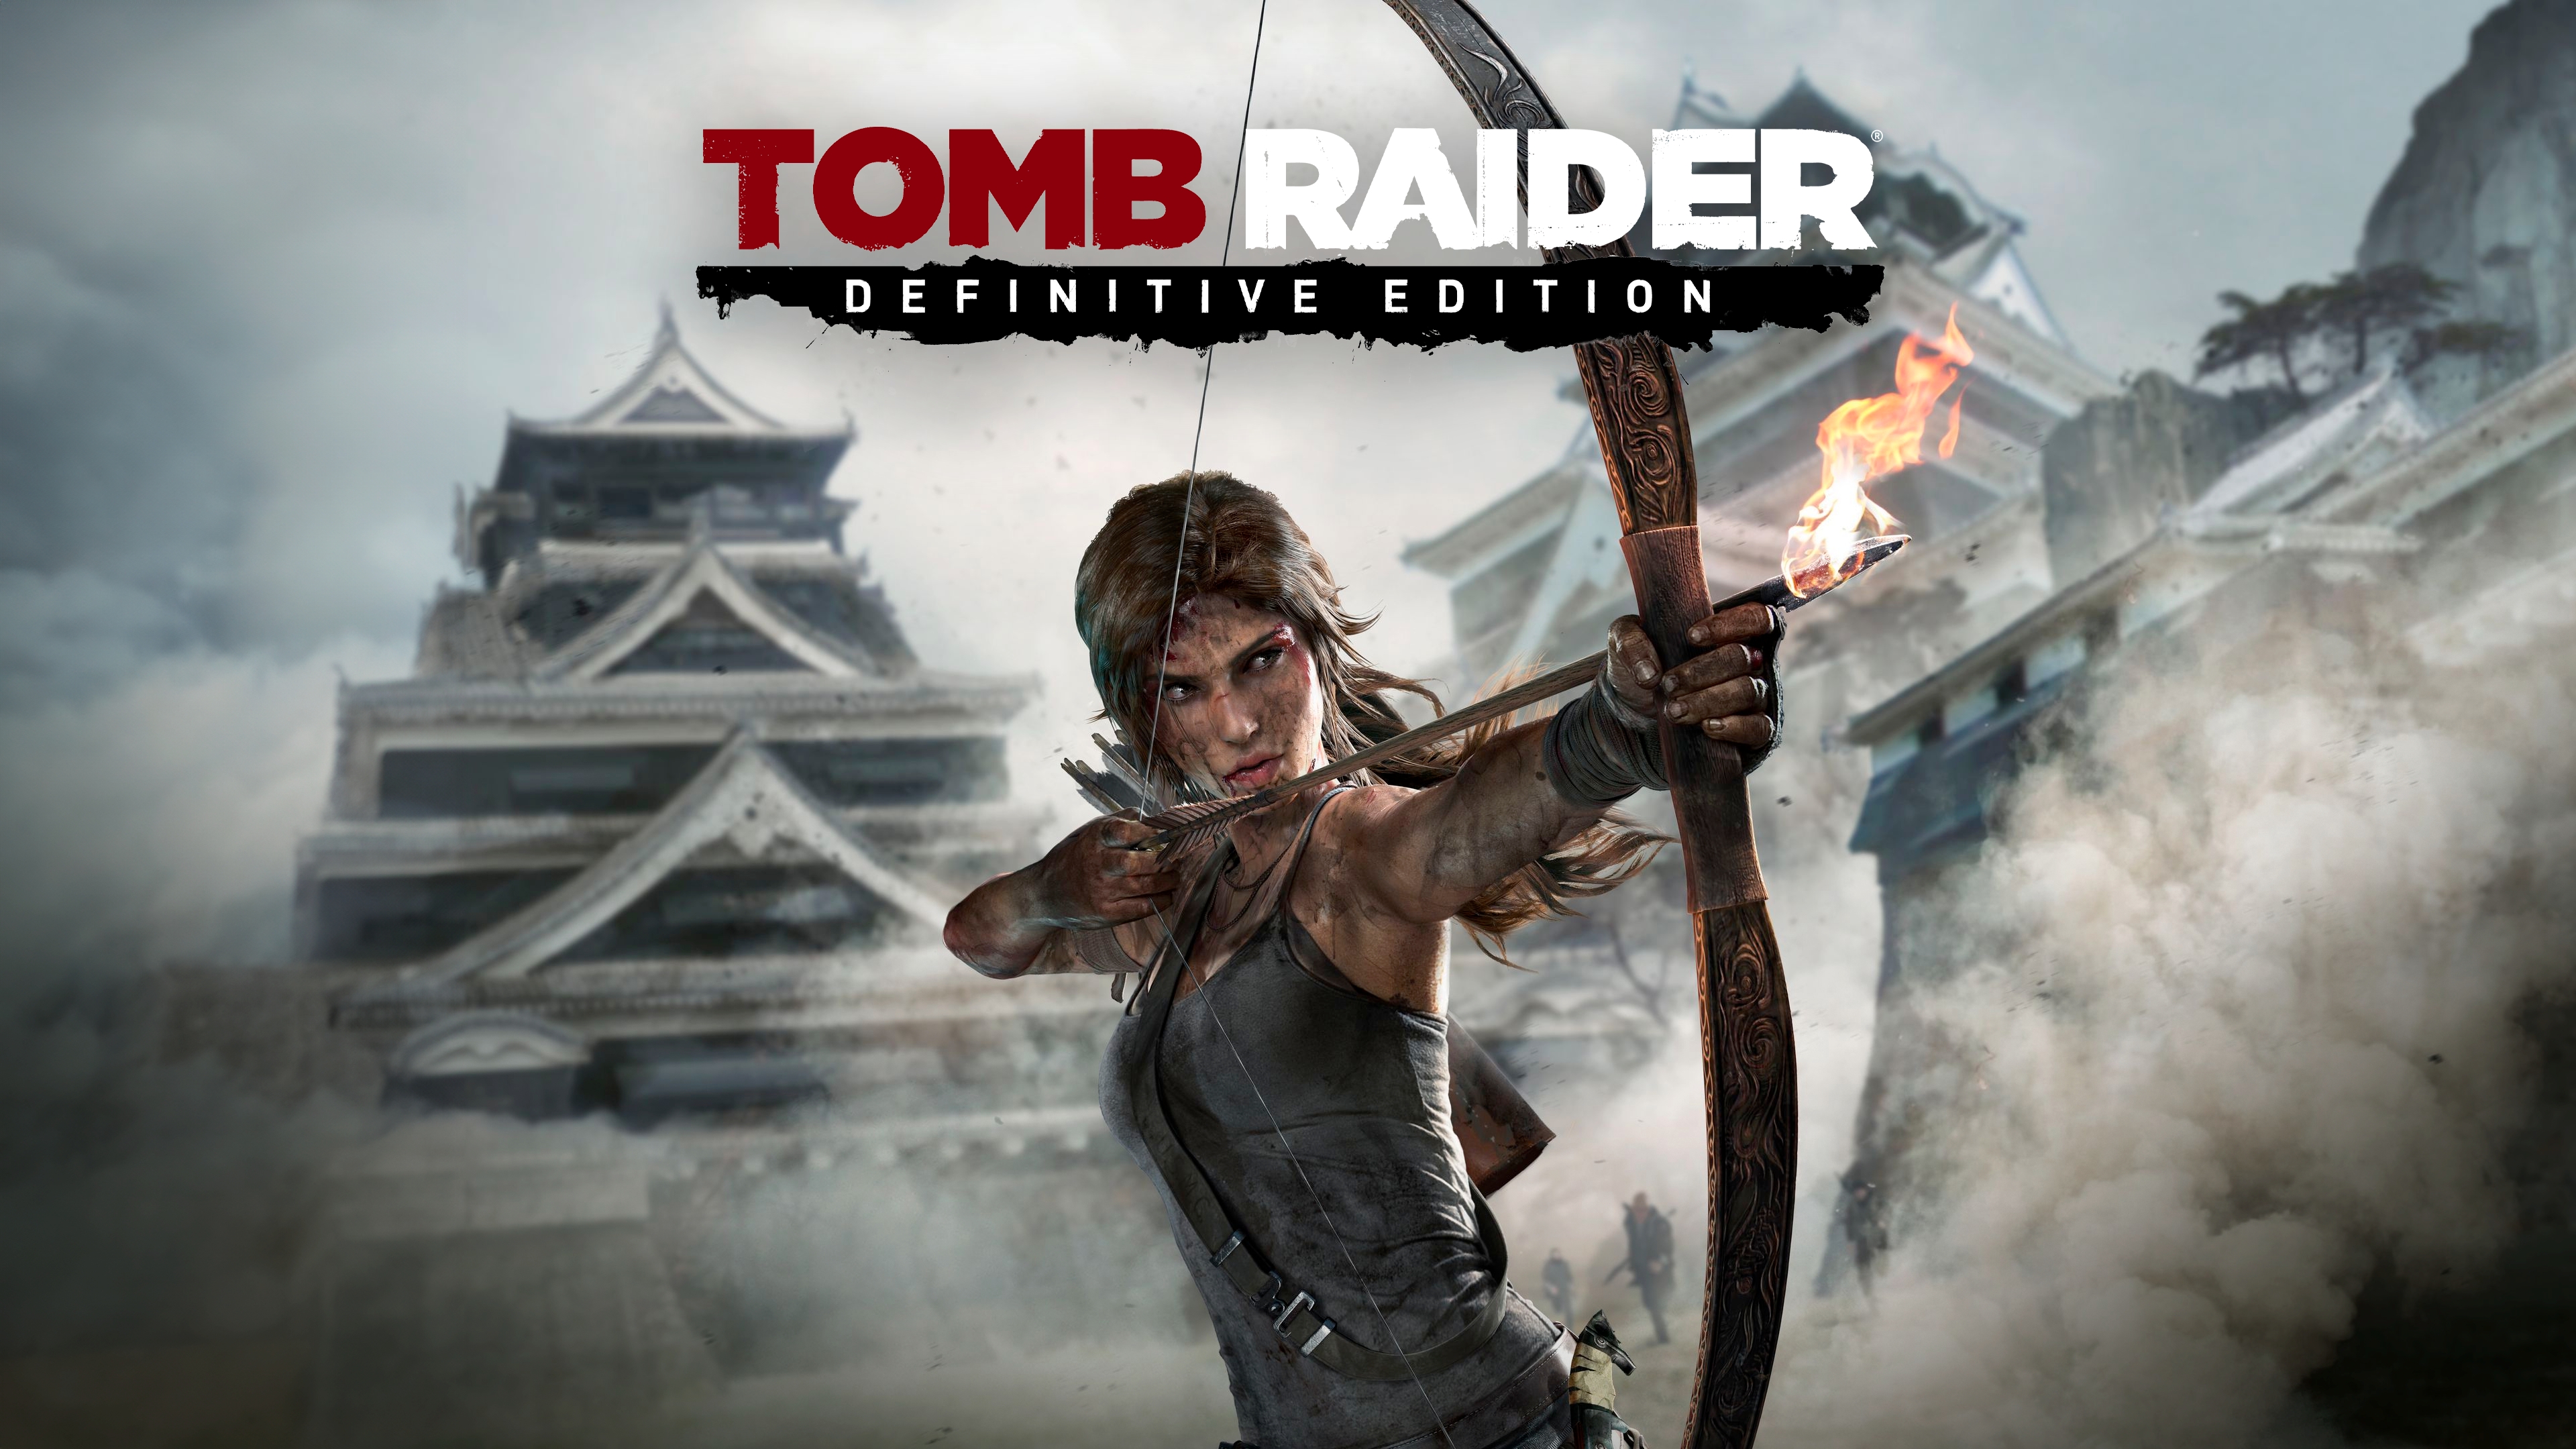 metacritic shadow of the tomb raider definitive edition